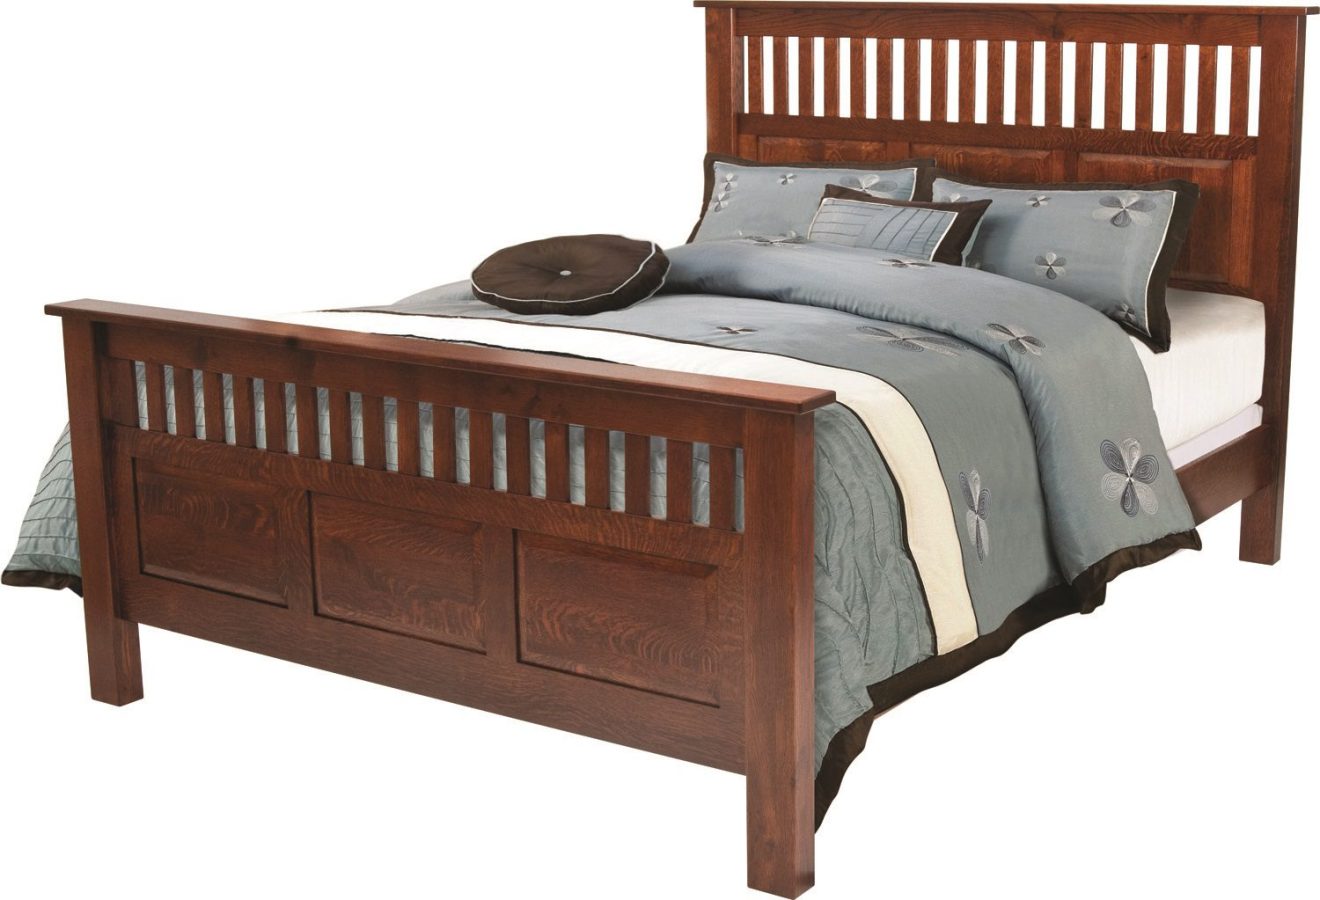 Antique Mission Bed by Farmside Wood